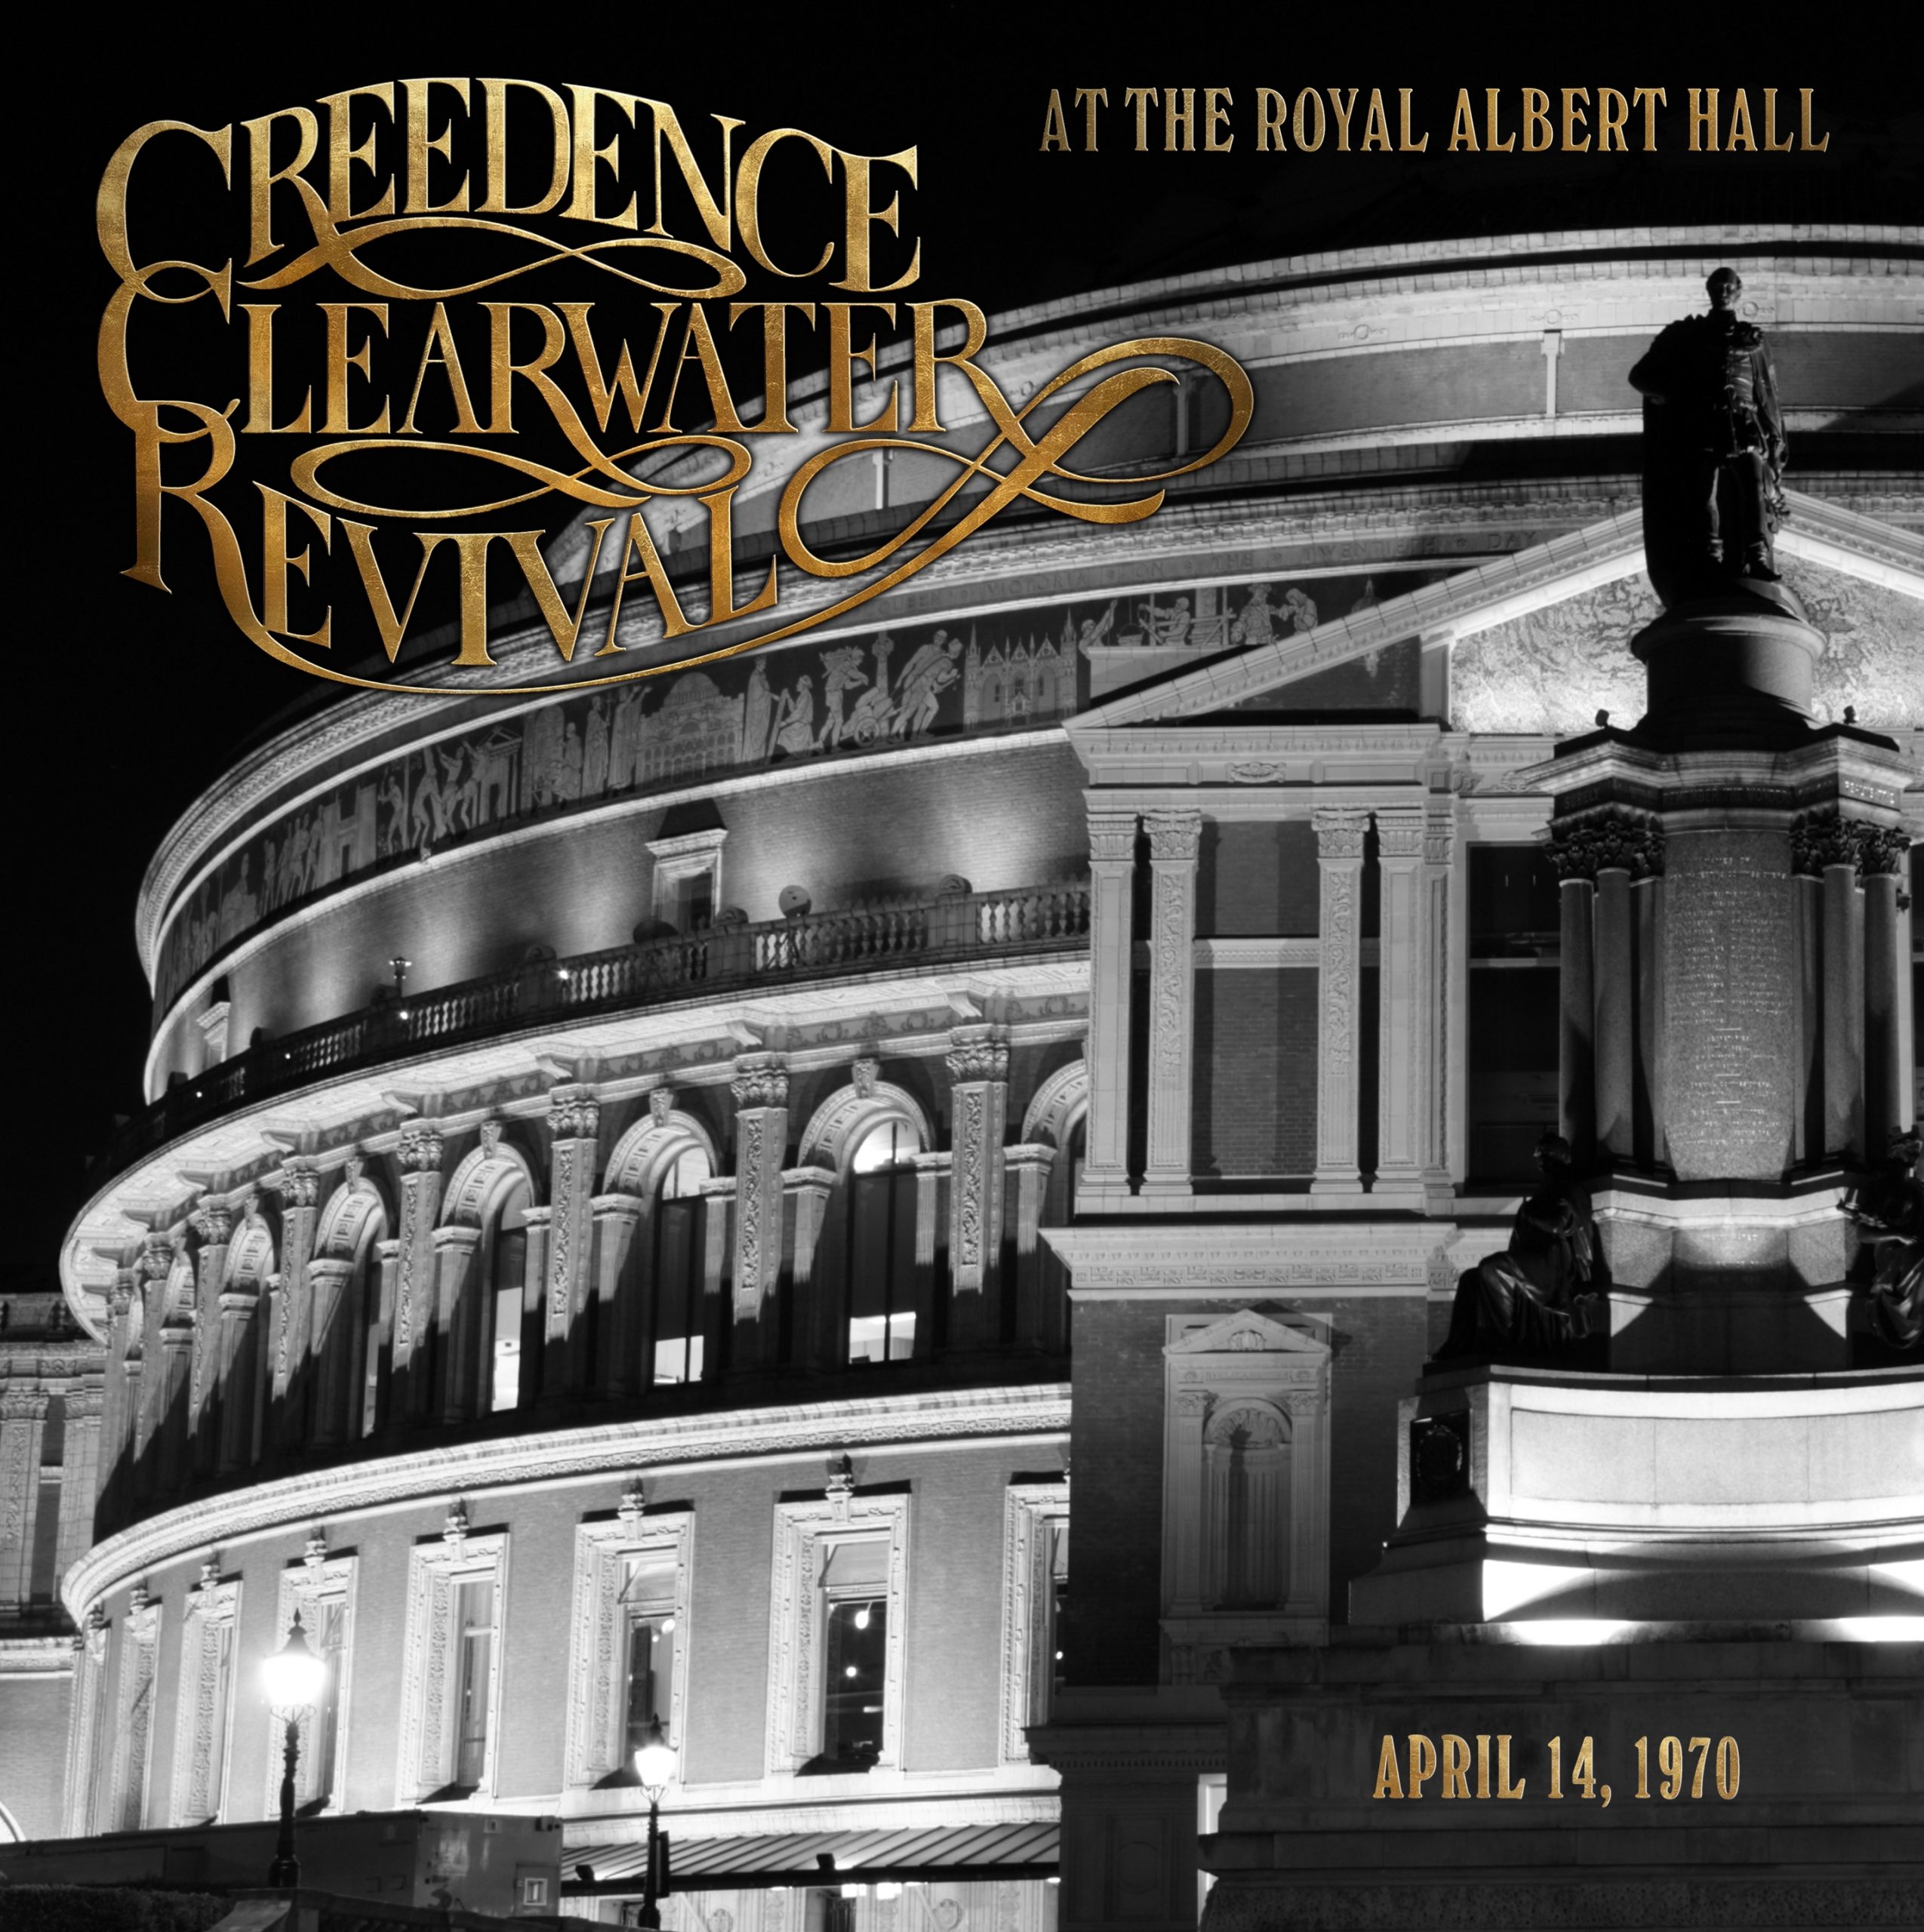 CD Shop - CREEDENCE CLEARWATER REVIV At The Royal Albert Hall